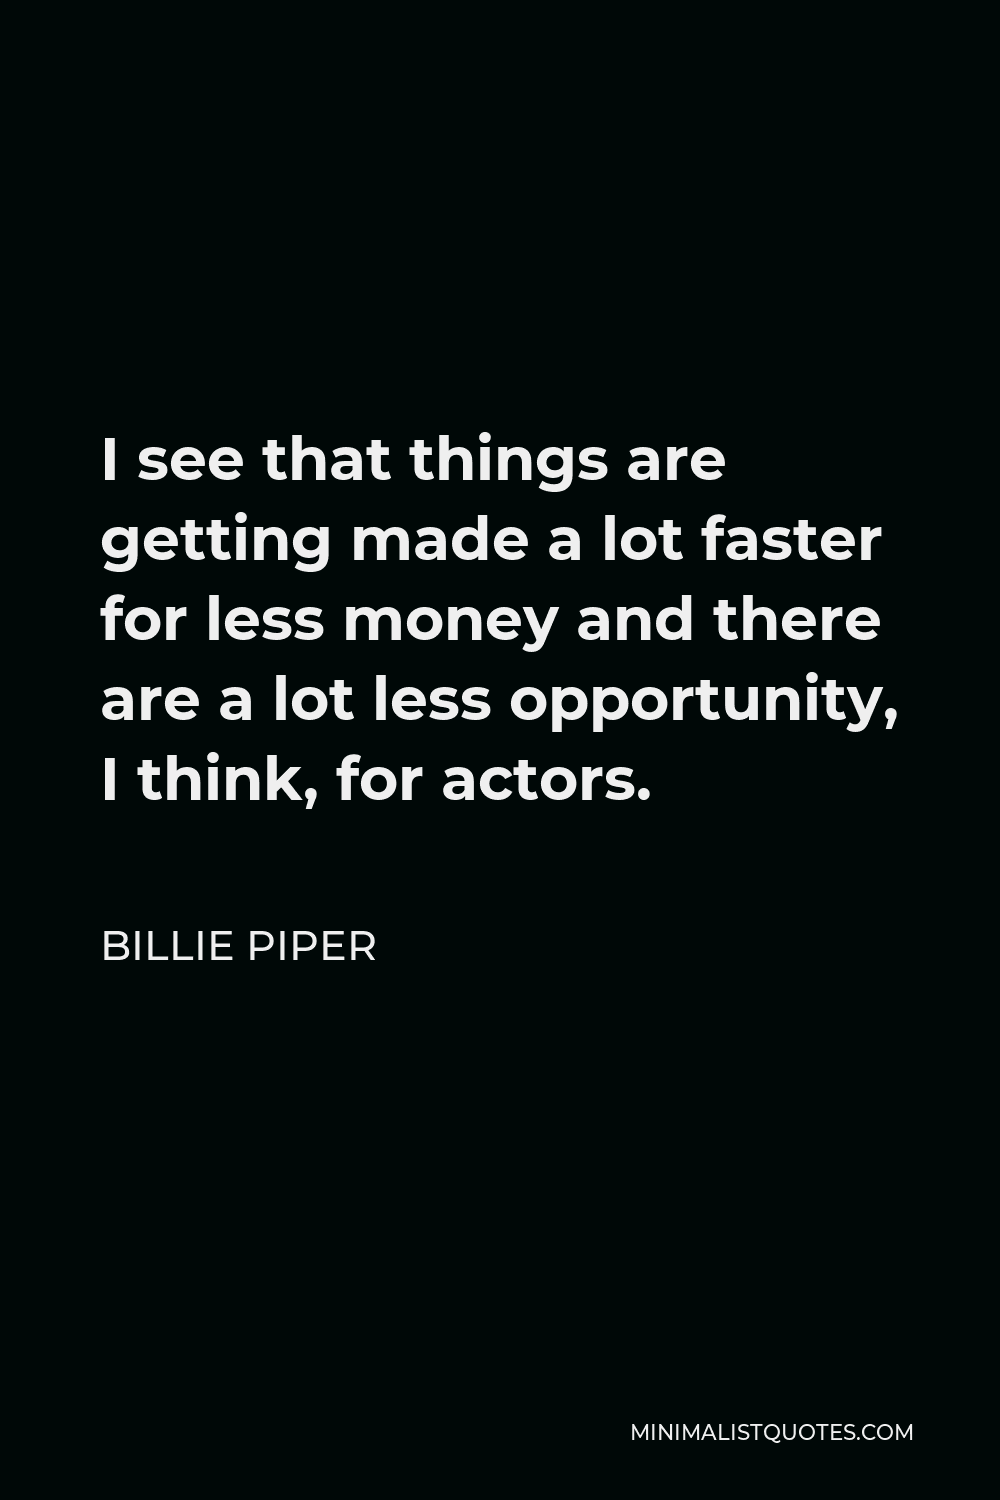 Billie Piper Quote - I see that things are getting made a lot faster for less money and there are a lot less opportunity, I think, for actors.